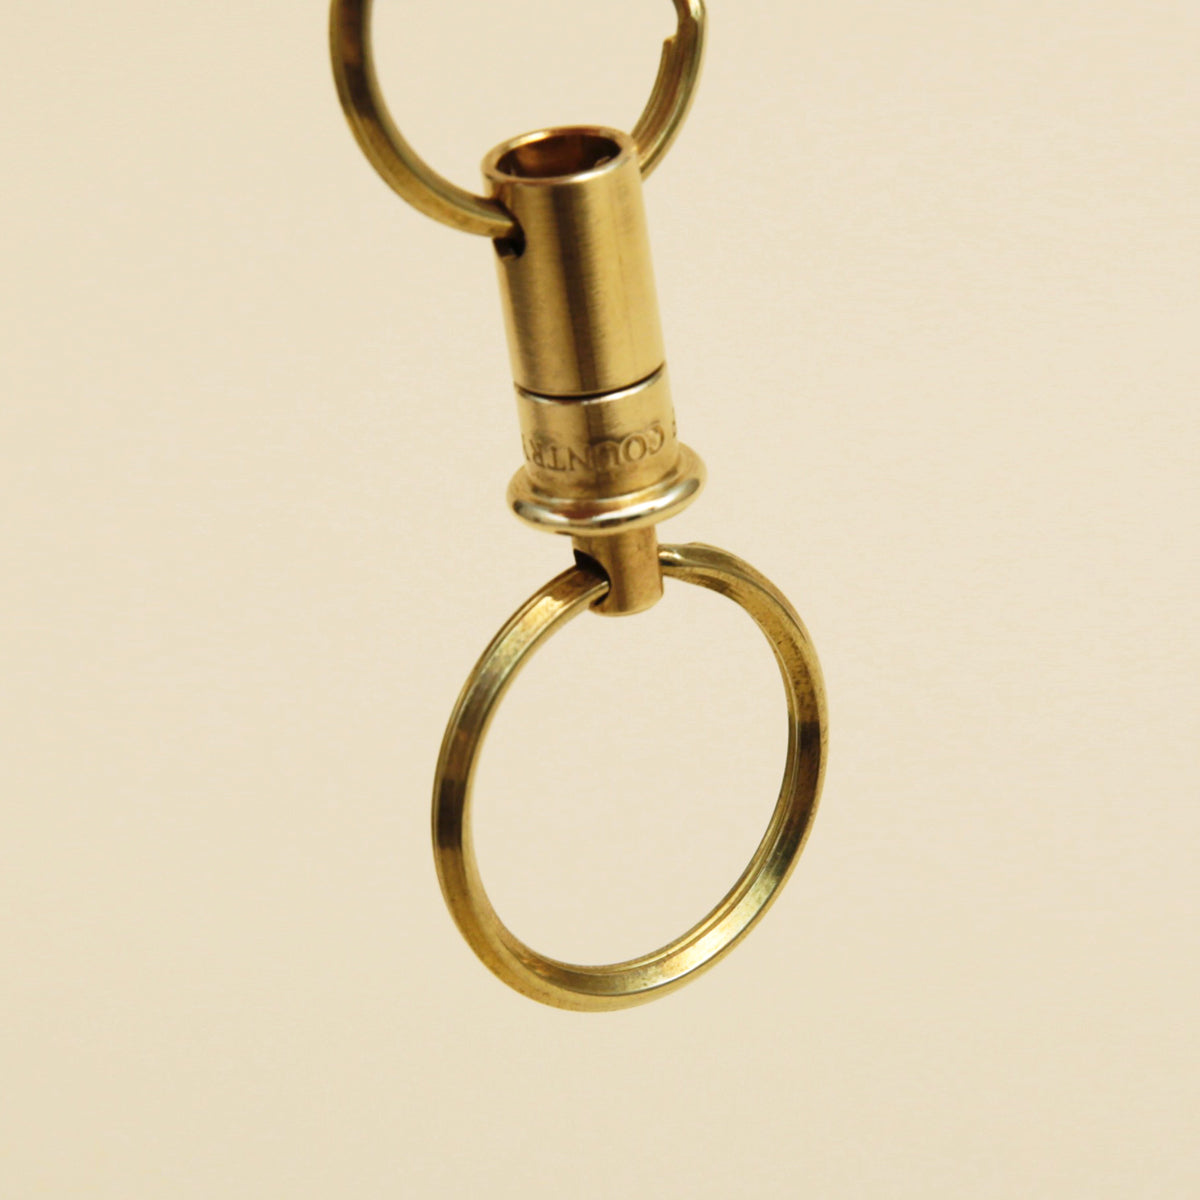 Releasable Brass Key Ring